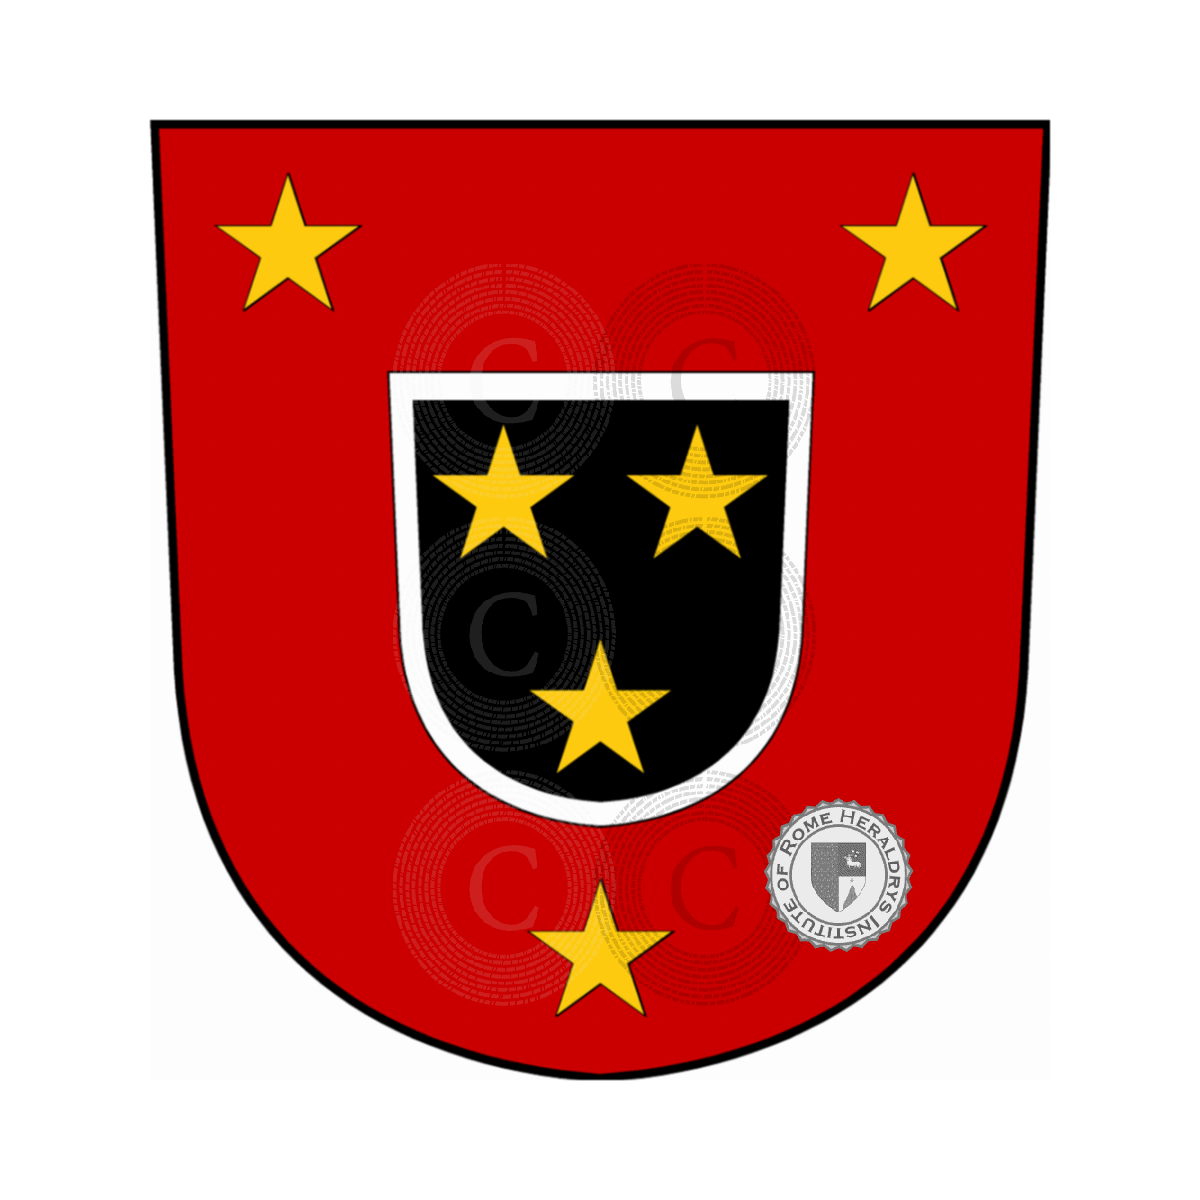 Coat of arms of familyBall